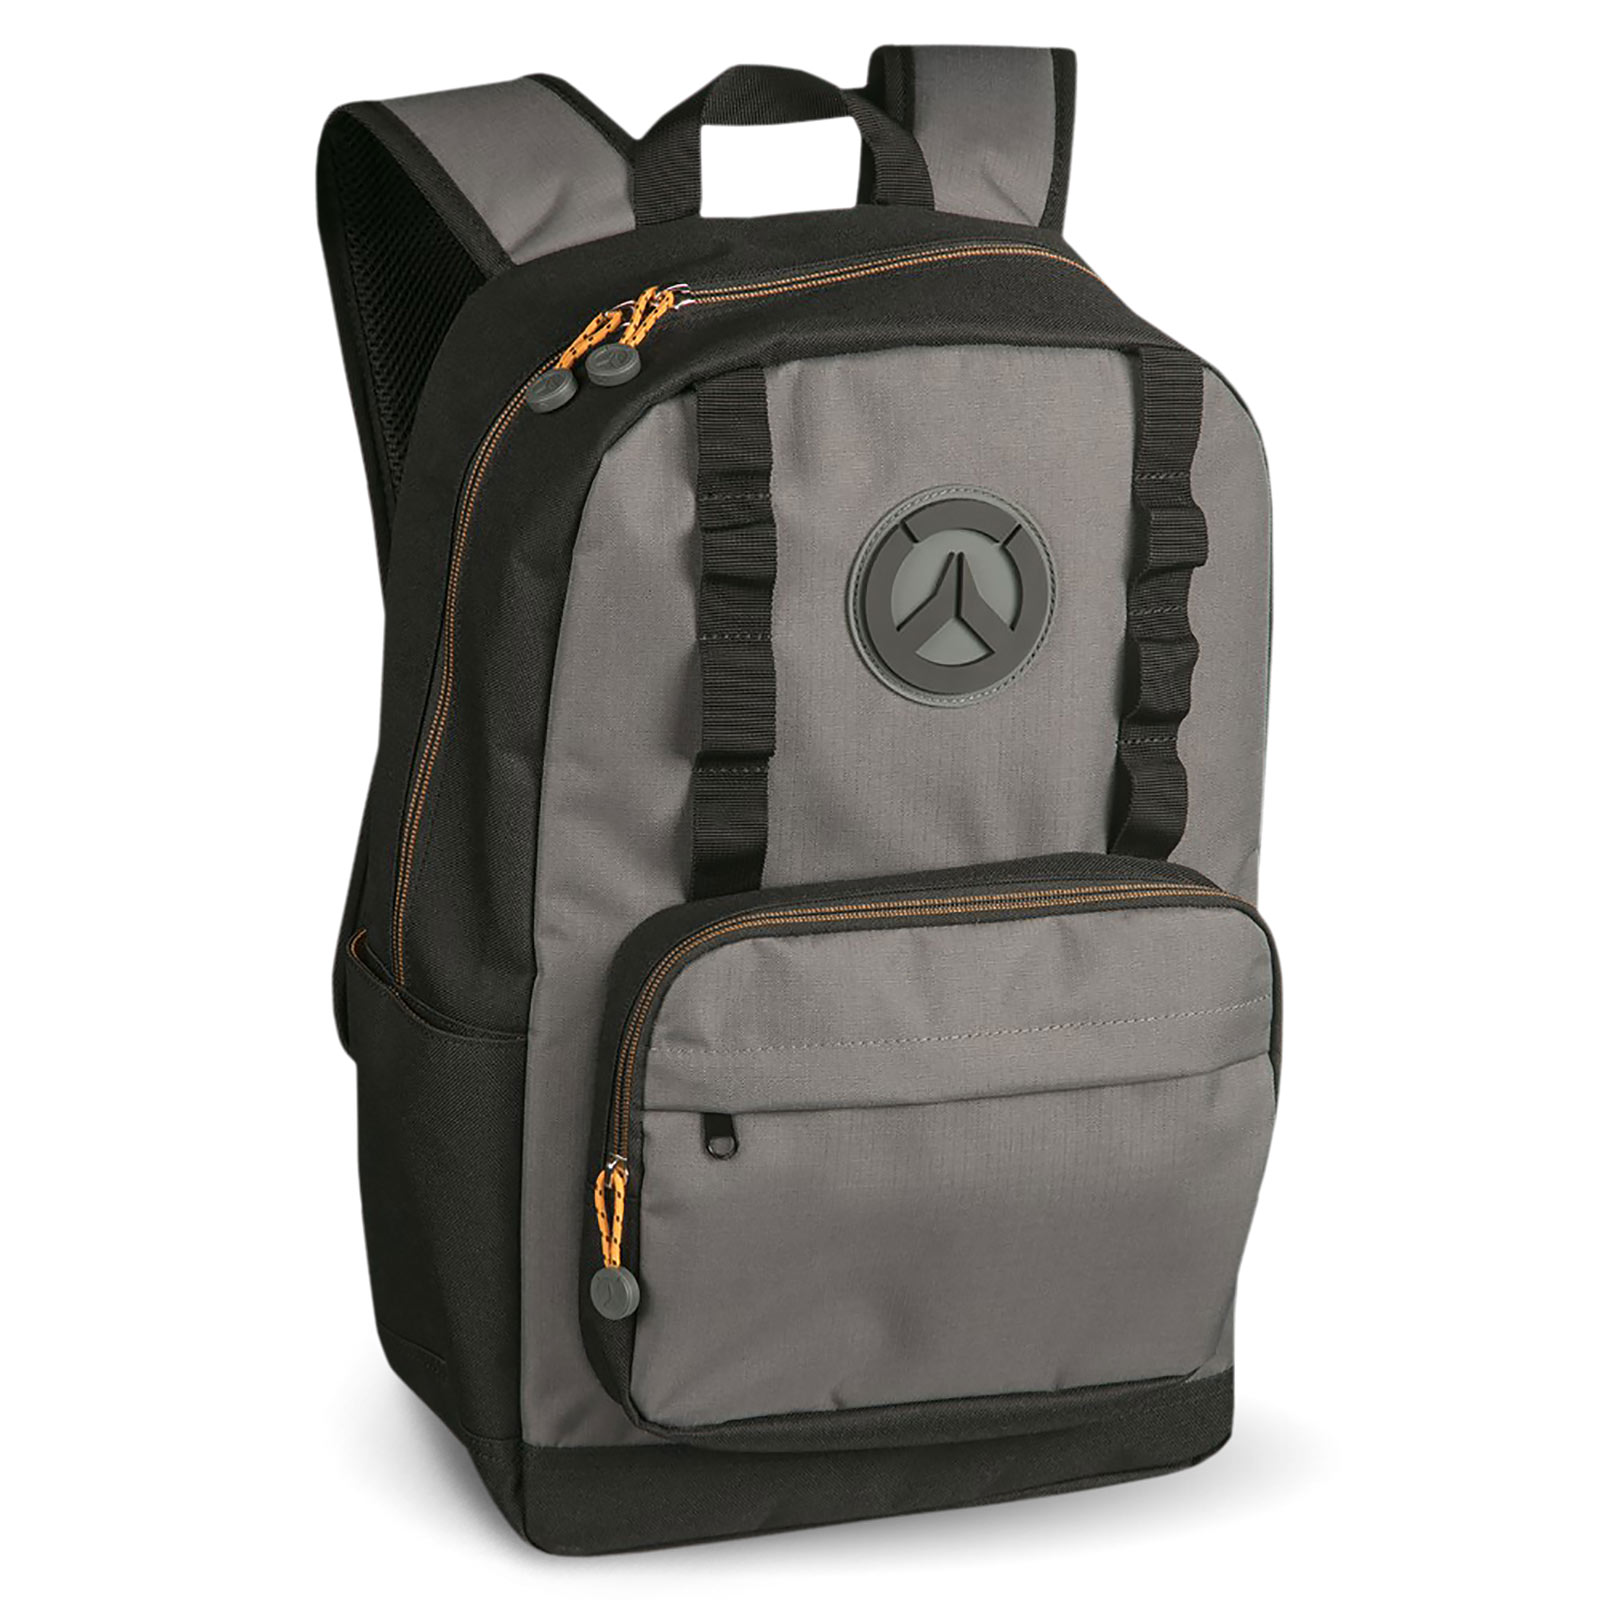 Overwatch - Payload Backpack